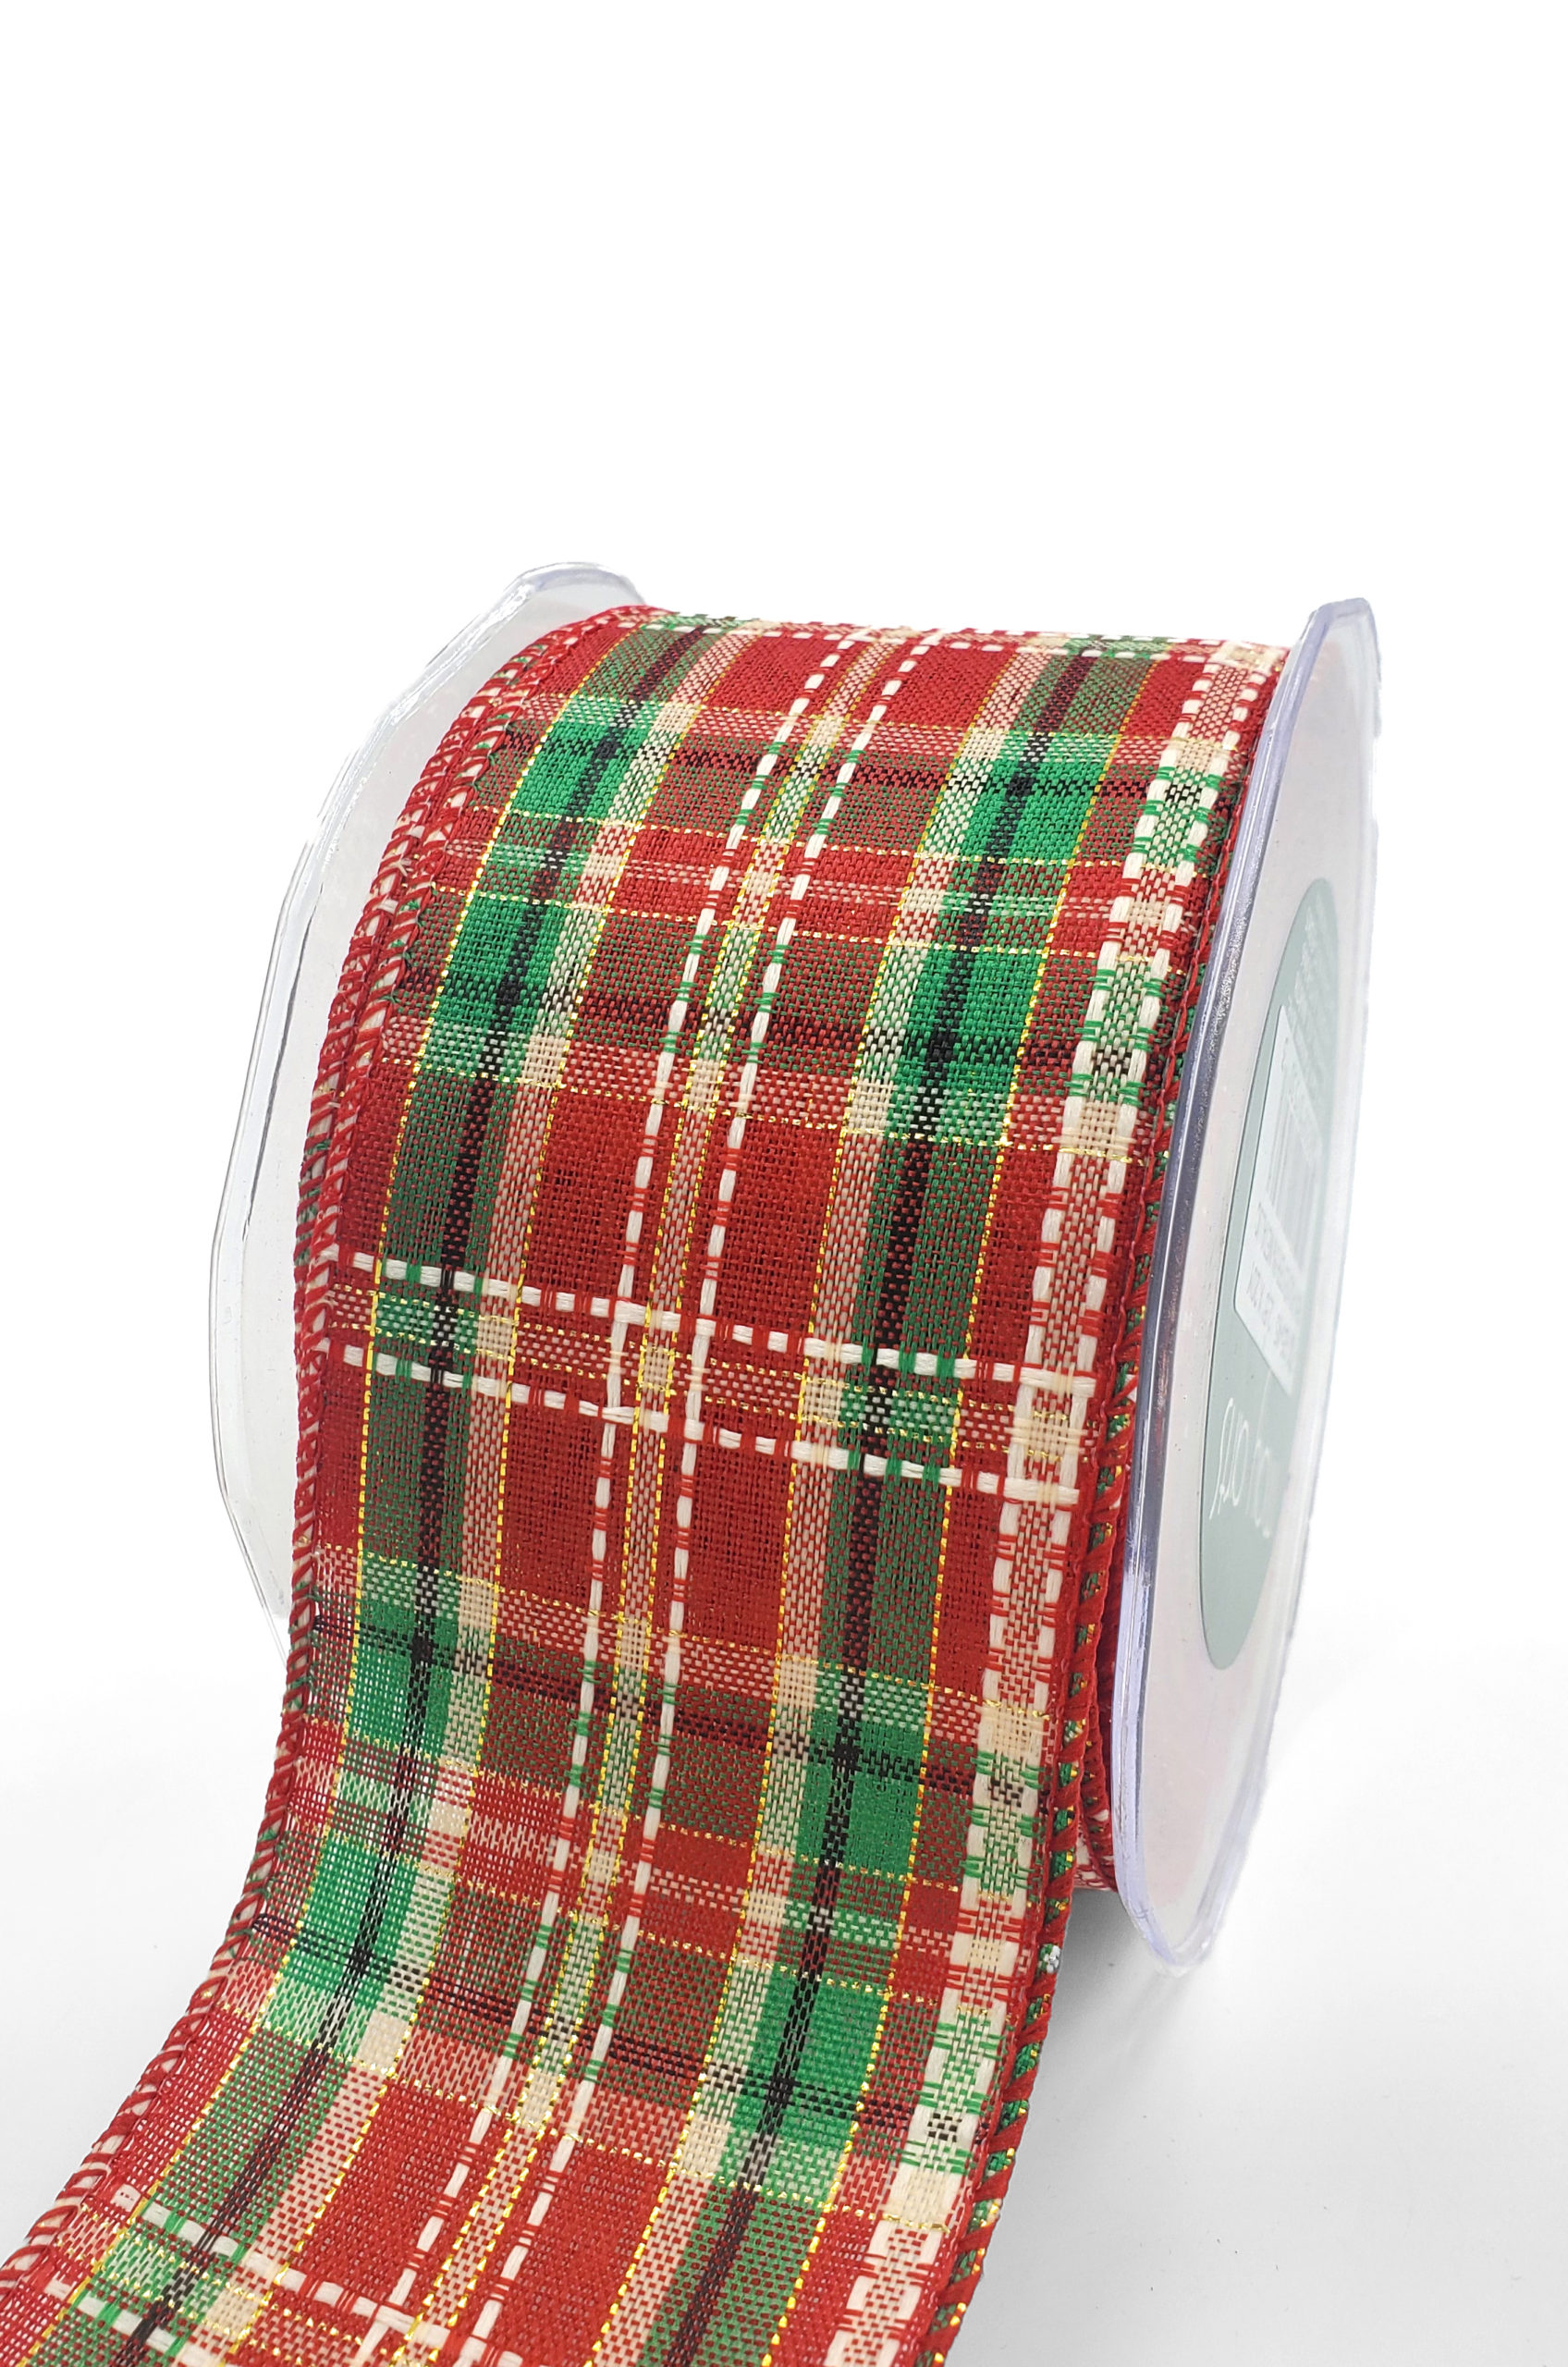 Gingham Ribbon – The Magical Christmas Co.